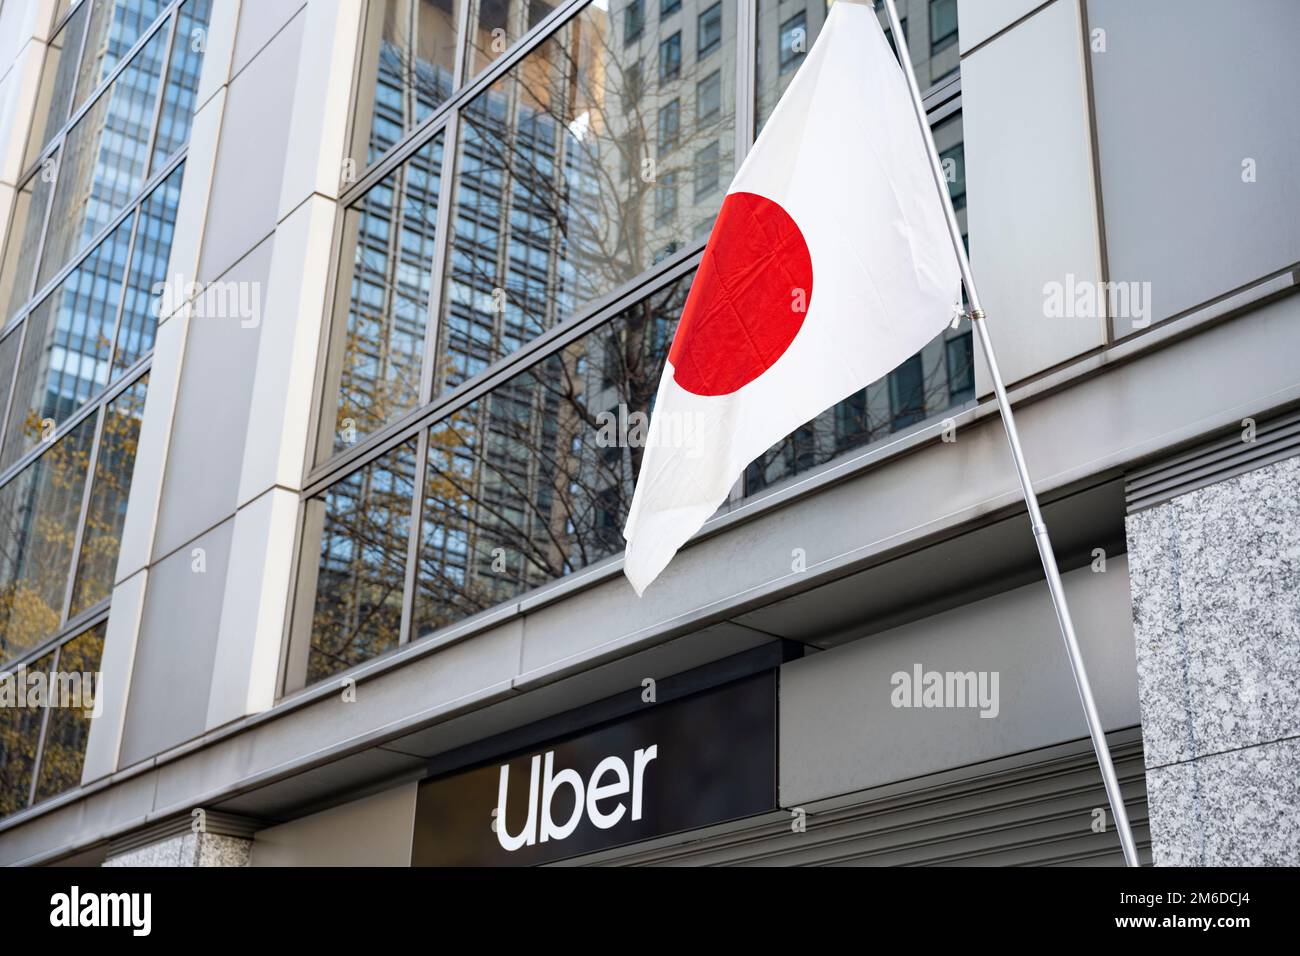 Tokyo, Japan. 3rd Jan, 2023. A Tokyo Uber Office in Nihombashi. The San Francisco-based rideshare company is authorized by Japanese regulatory officials to do business contracting with formal black livery cabs in Japan but faces stricter regulation than normally allowed in America. Japan has recently reopened to tourism after over two years of travel bans due to the COVID-19 pandemic. The Yen has greatly depreciated against the USD US Dollar, creating economic turmoil for international trade and the Japanese economy. Japan also is now experiencing a daily count of over 100,000 new COVID-19 Stock Photo